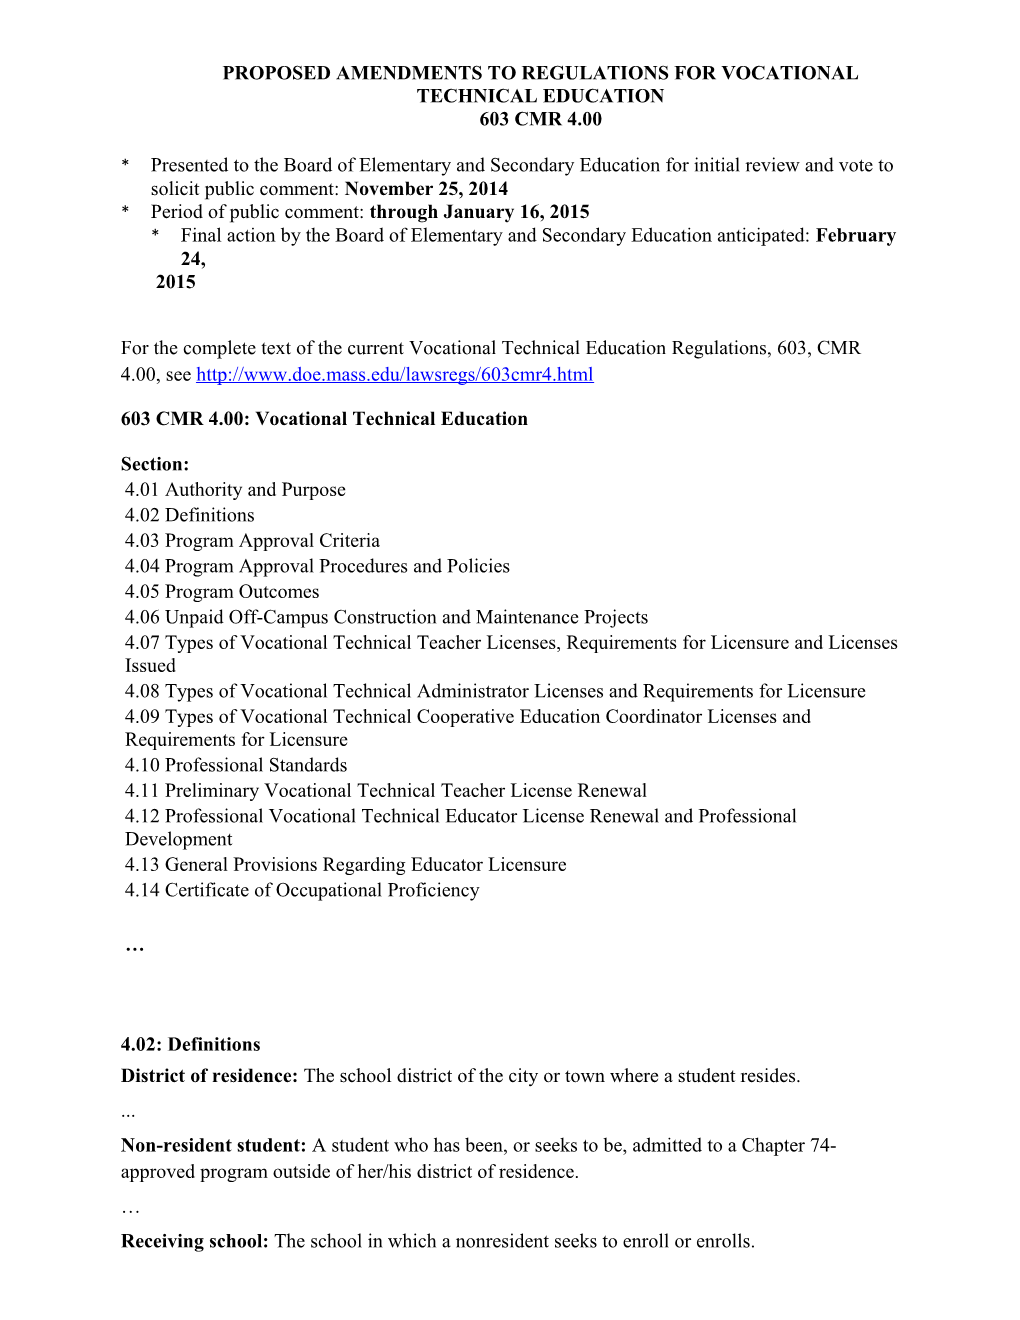 Board Attachments 11/25/14, PROPOSED AMENDMENTS to REGULATIONS for VOCATIONAL TECHNICAL